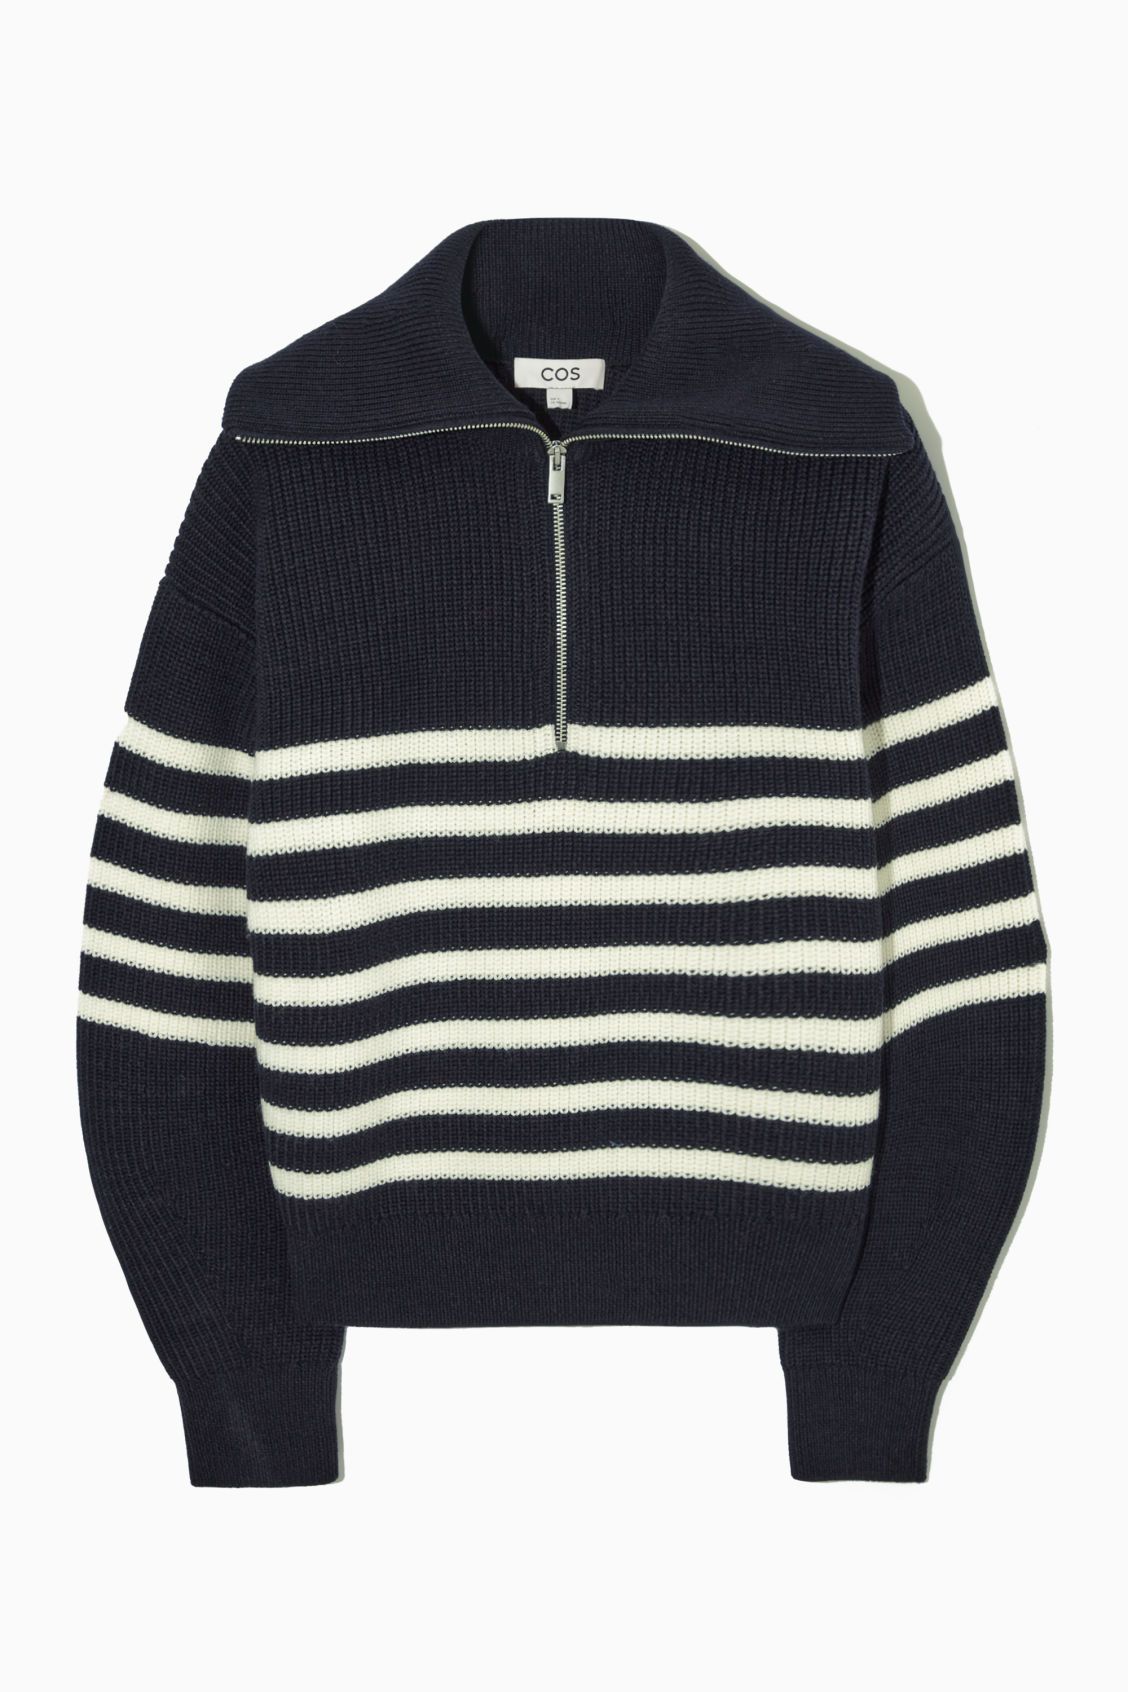 KNITTED HALF-ZIP SWEATER | COS (US)